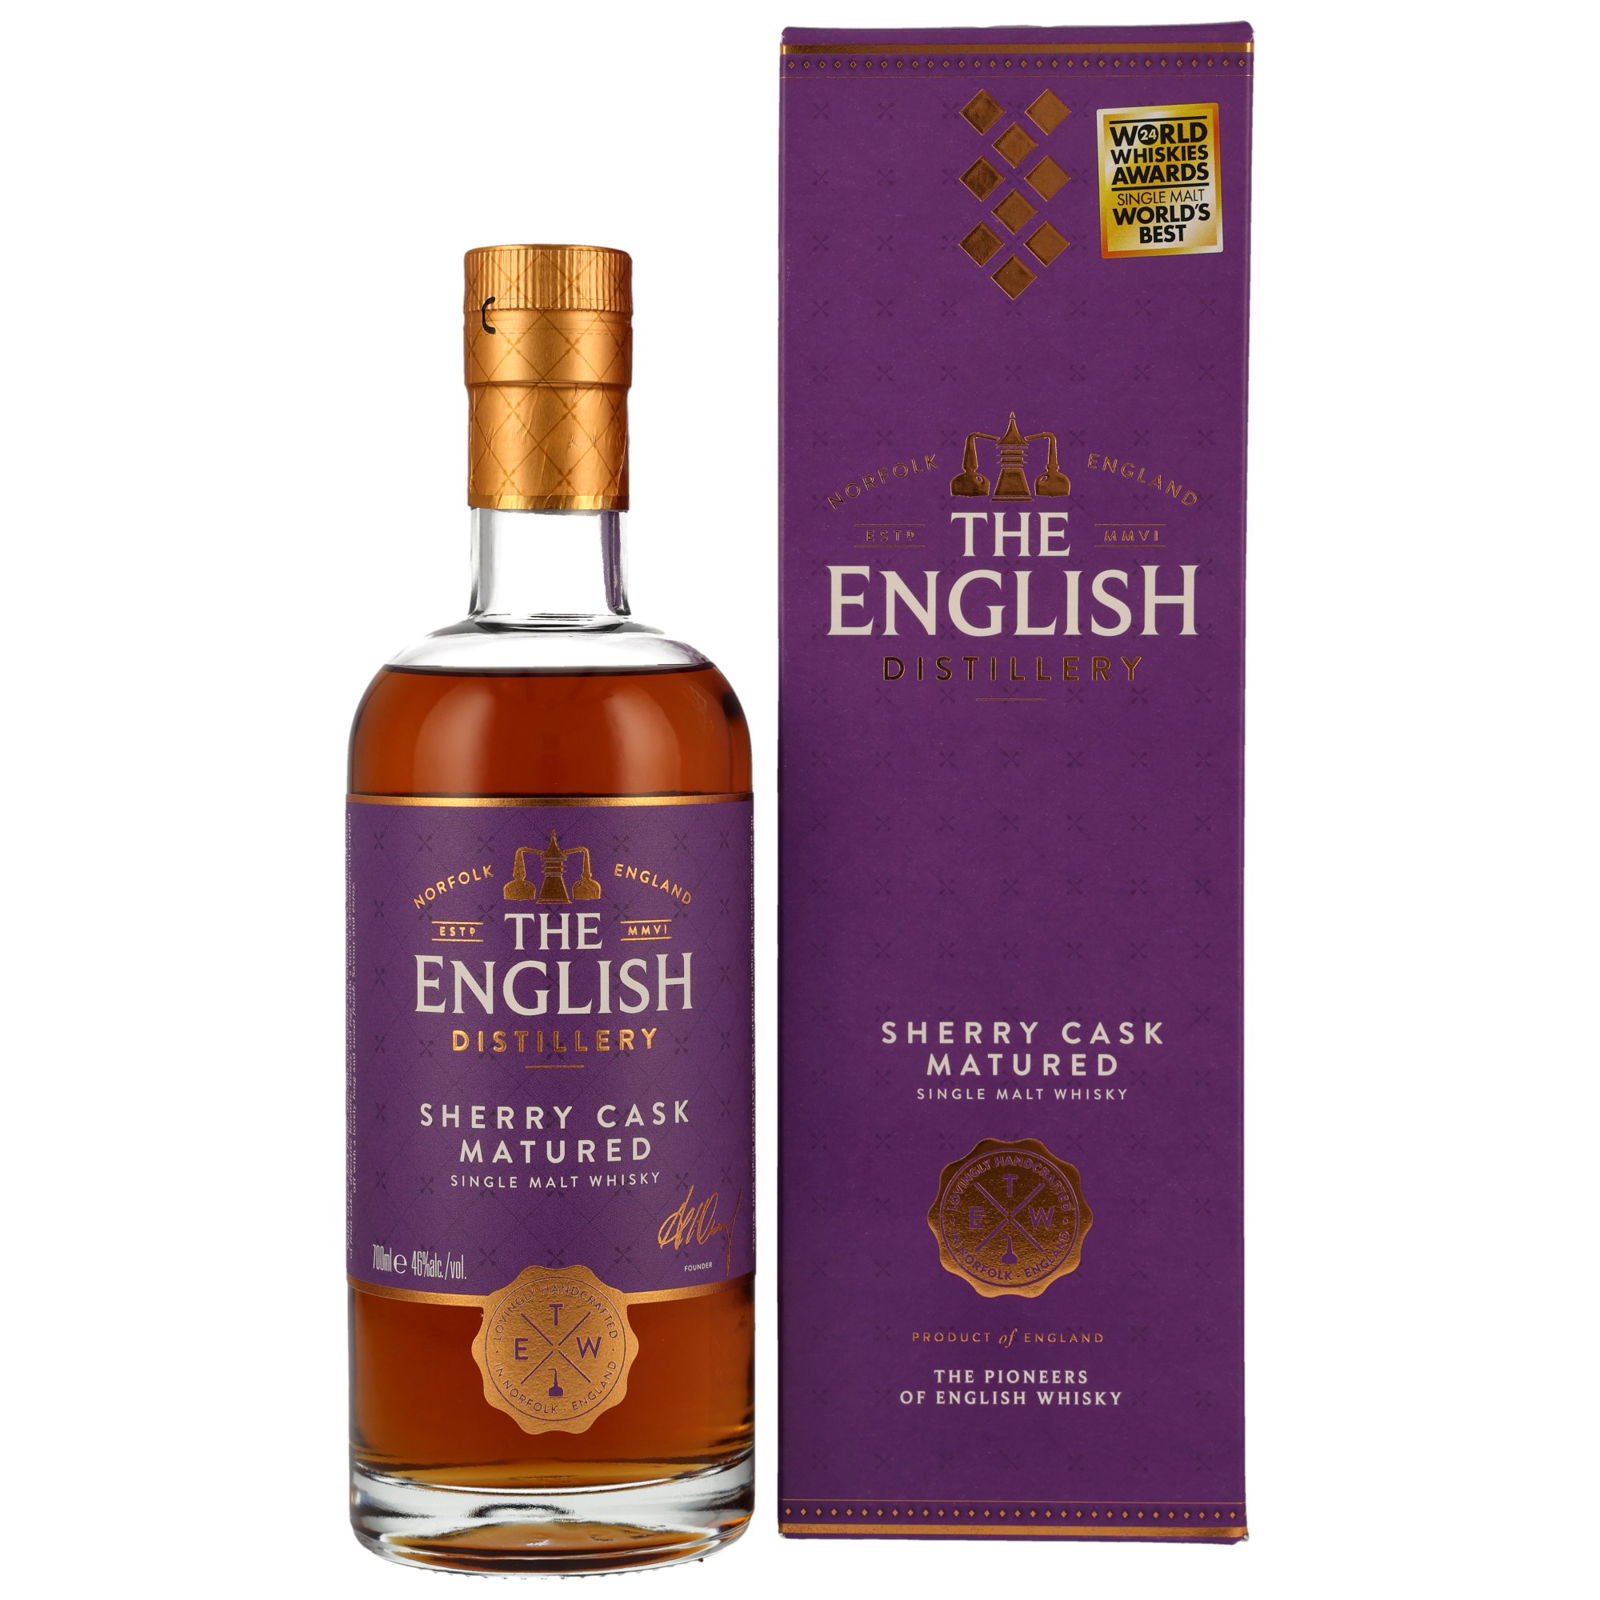 The English Sherry Cask Matured